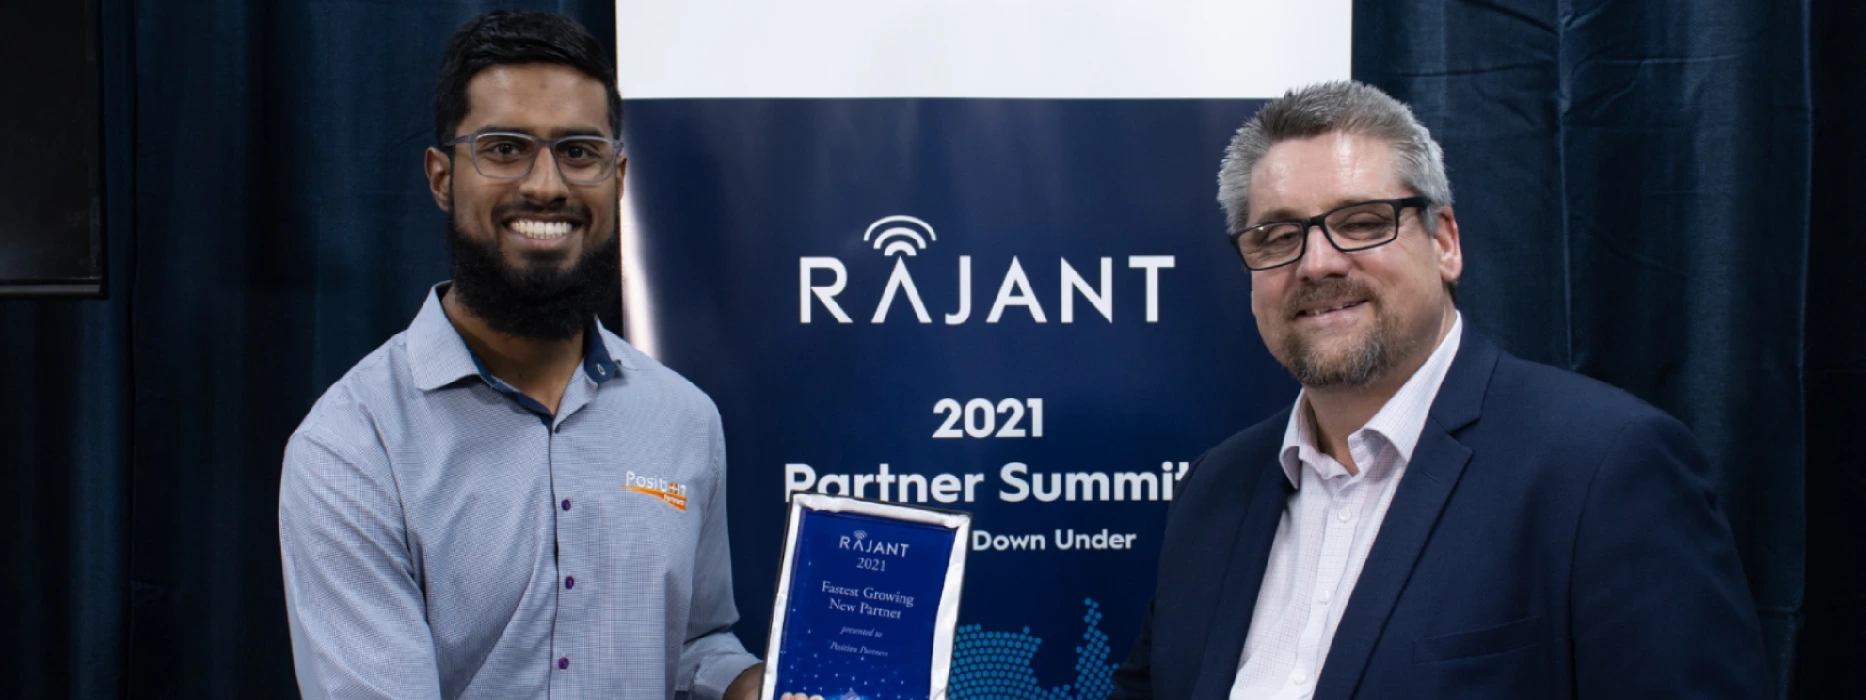 Position Partners awarded Fastest Growing New Partner at Rajant Corporation’s Australian Summit